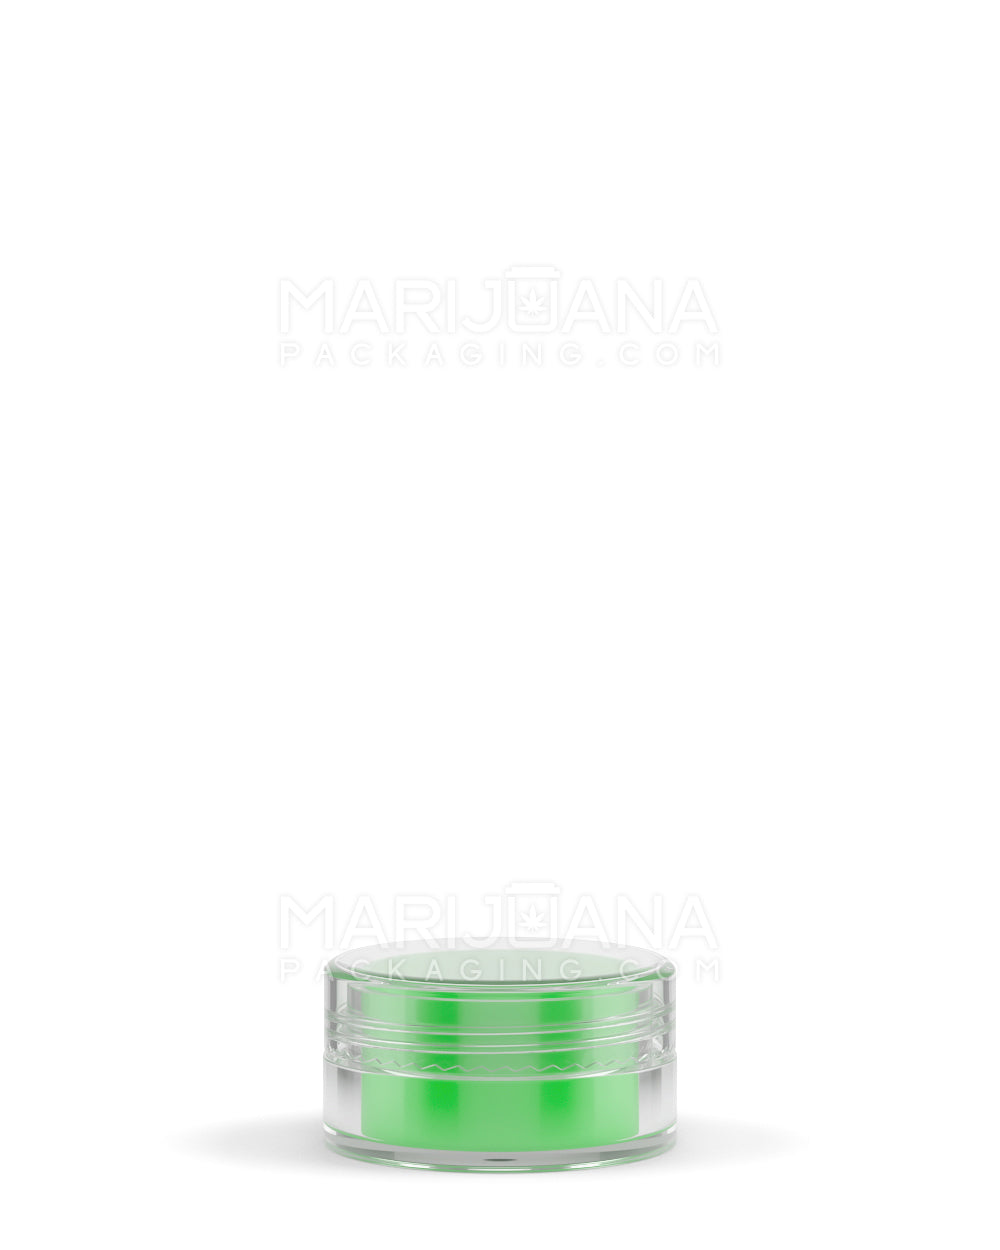 Clear Concentrate Containers w/ Screw Top Cap & Green Silicone Insert | 5mL - Plastic - 100 Count - 2